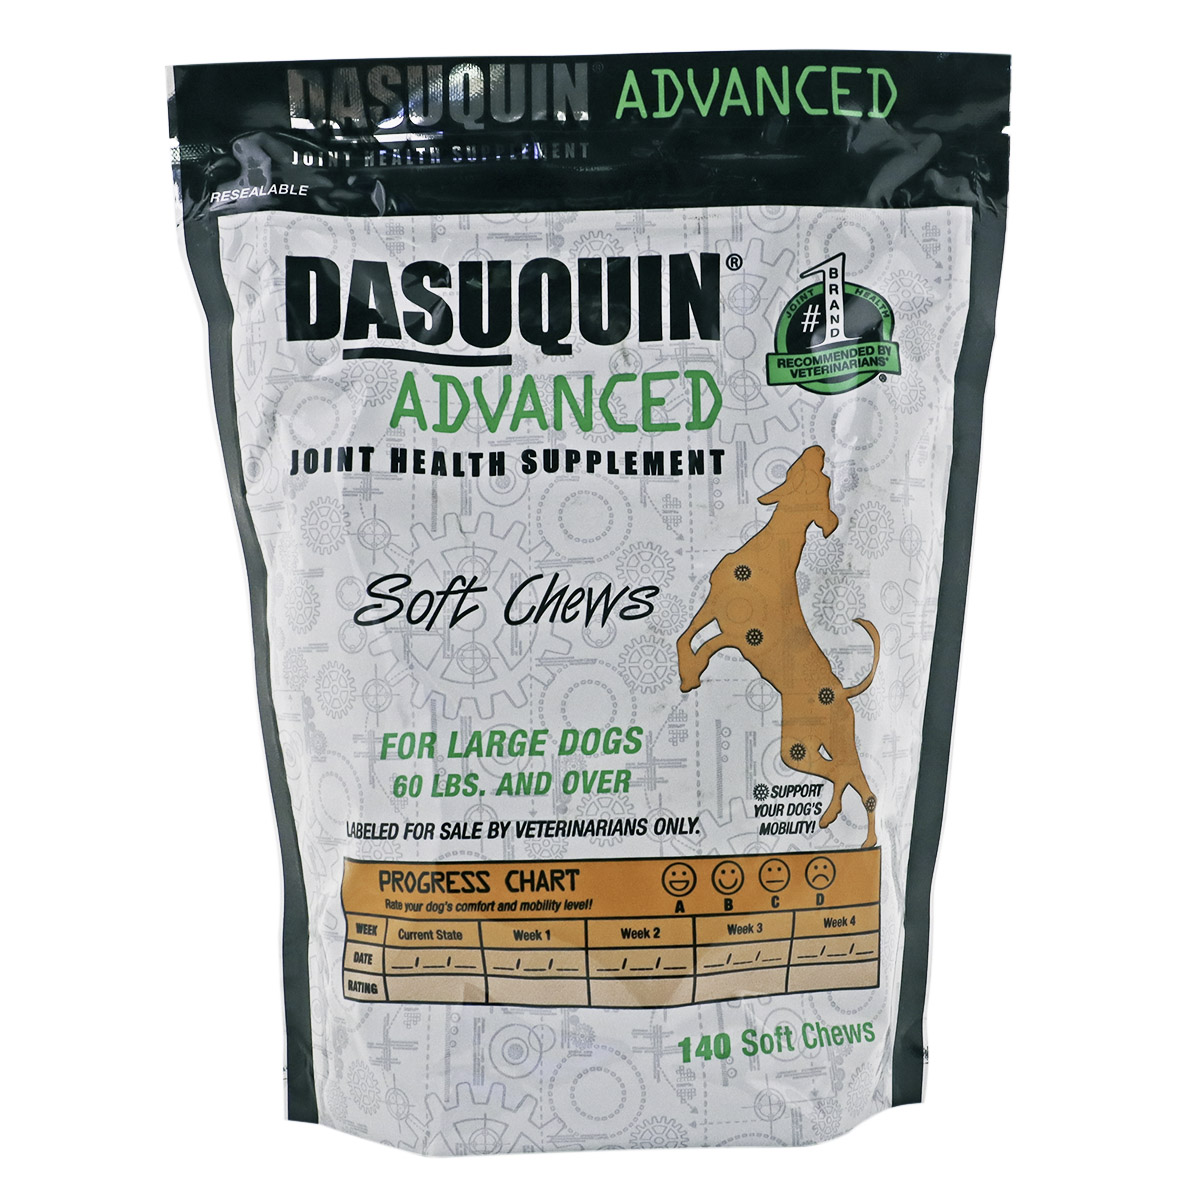 northeast-veterinary-services-dasuquin-advanced-soft-chews-for-large-dogs-140s